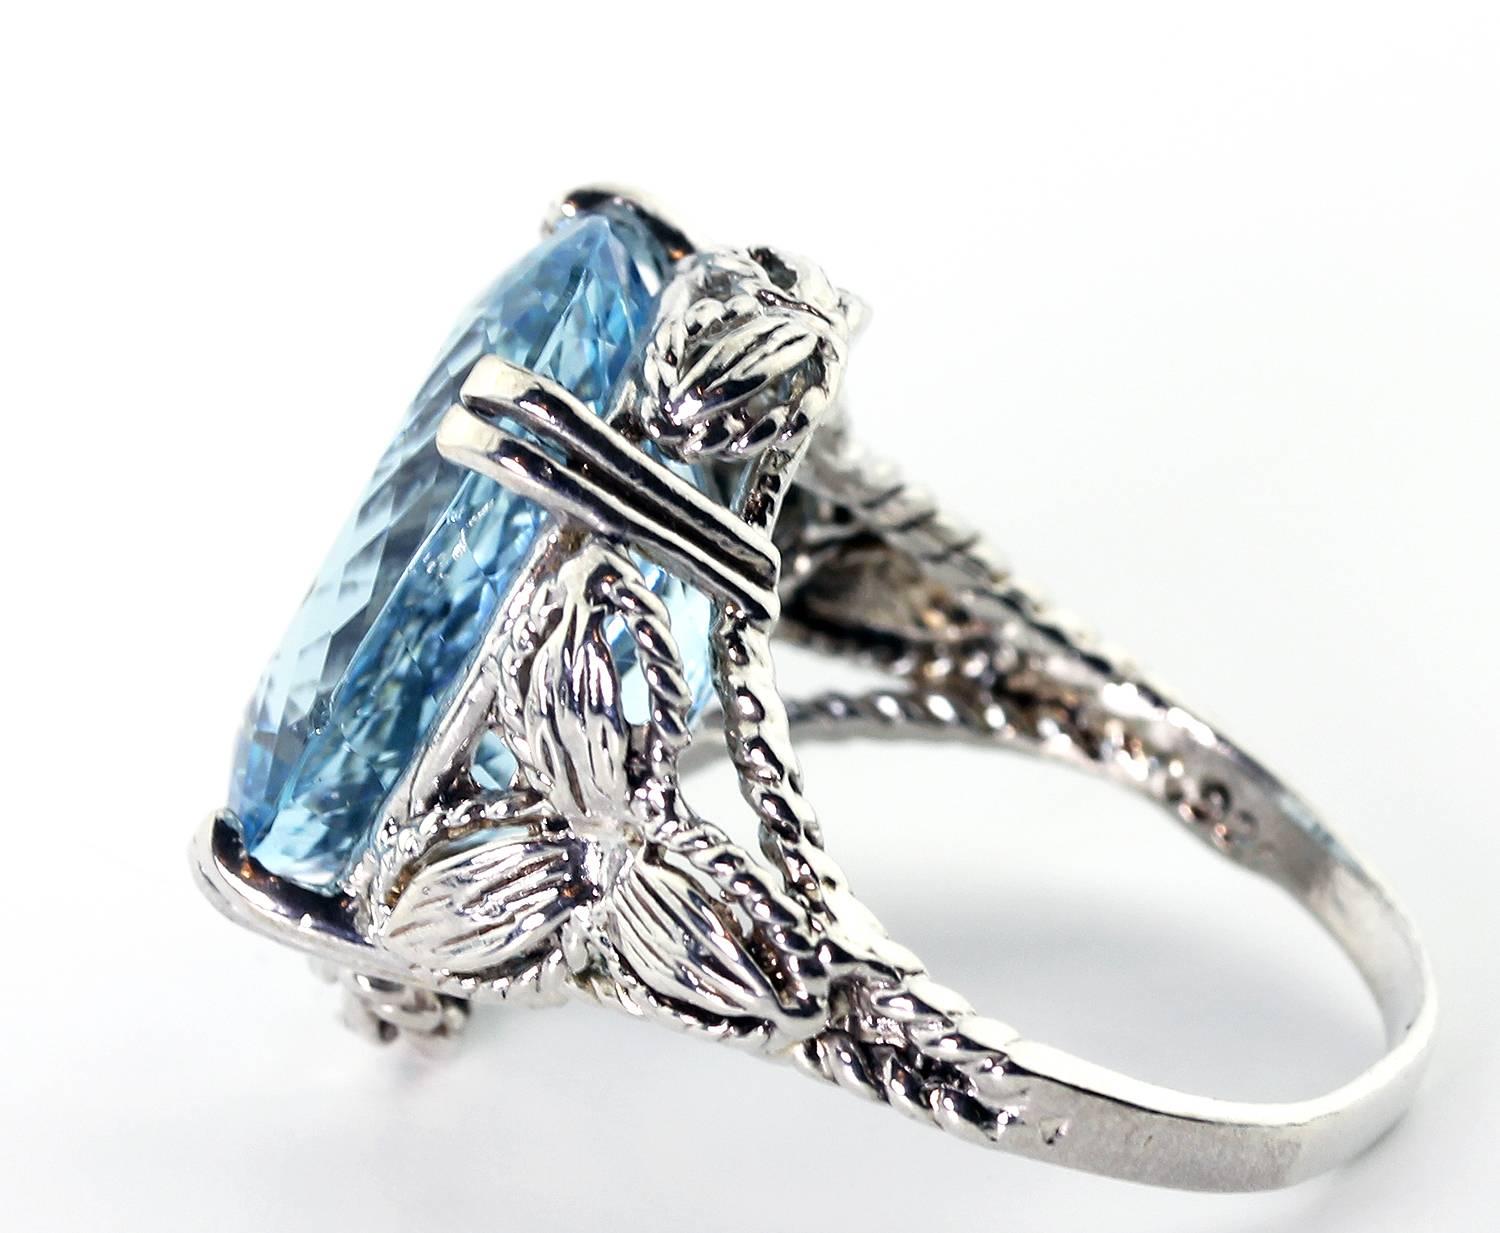 Oval Cut AJD Rare Exquisite 13.5Ct Intensely Sparkling Blue Aquamarine Cocktail Ring